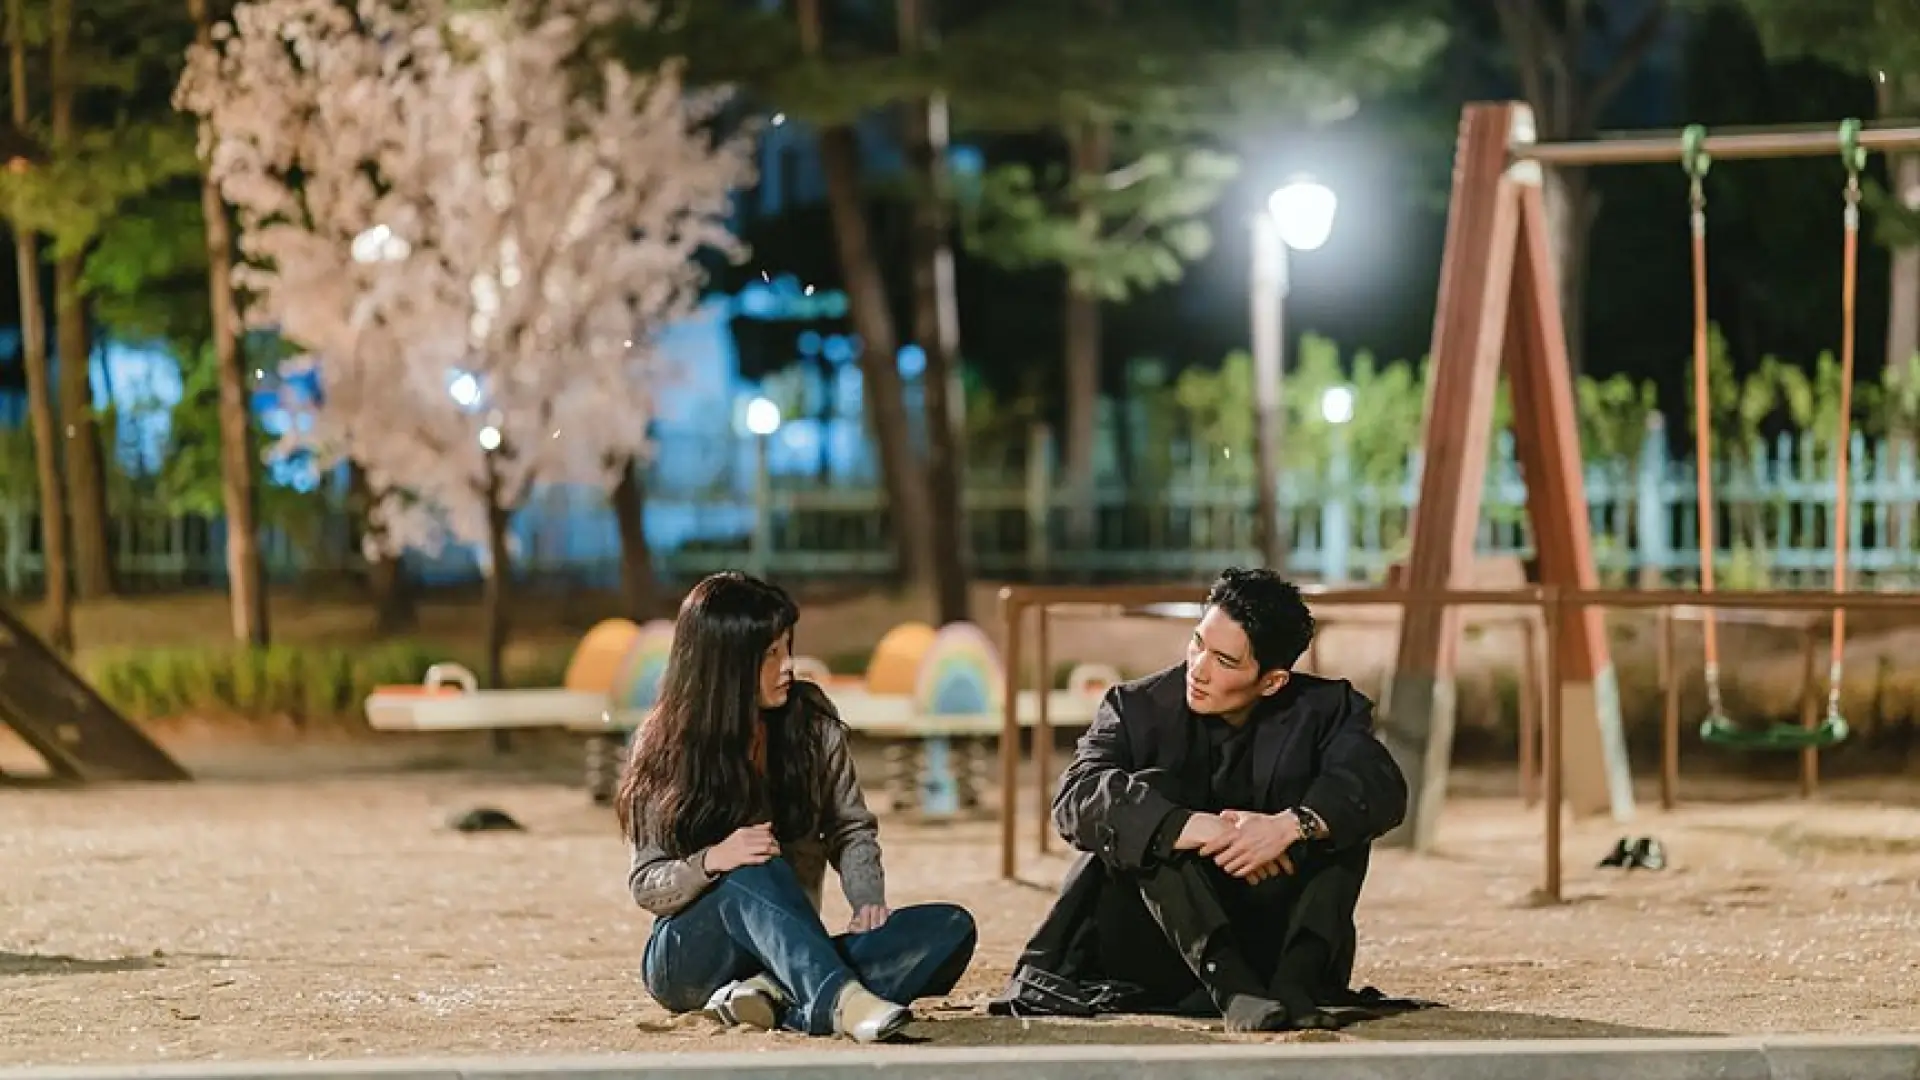 My Sweet Mobster: Episodes 3 & 4 Recap and Review